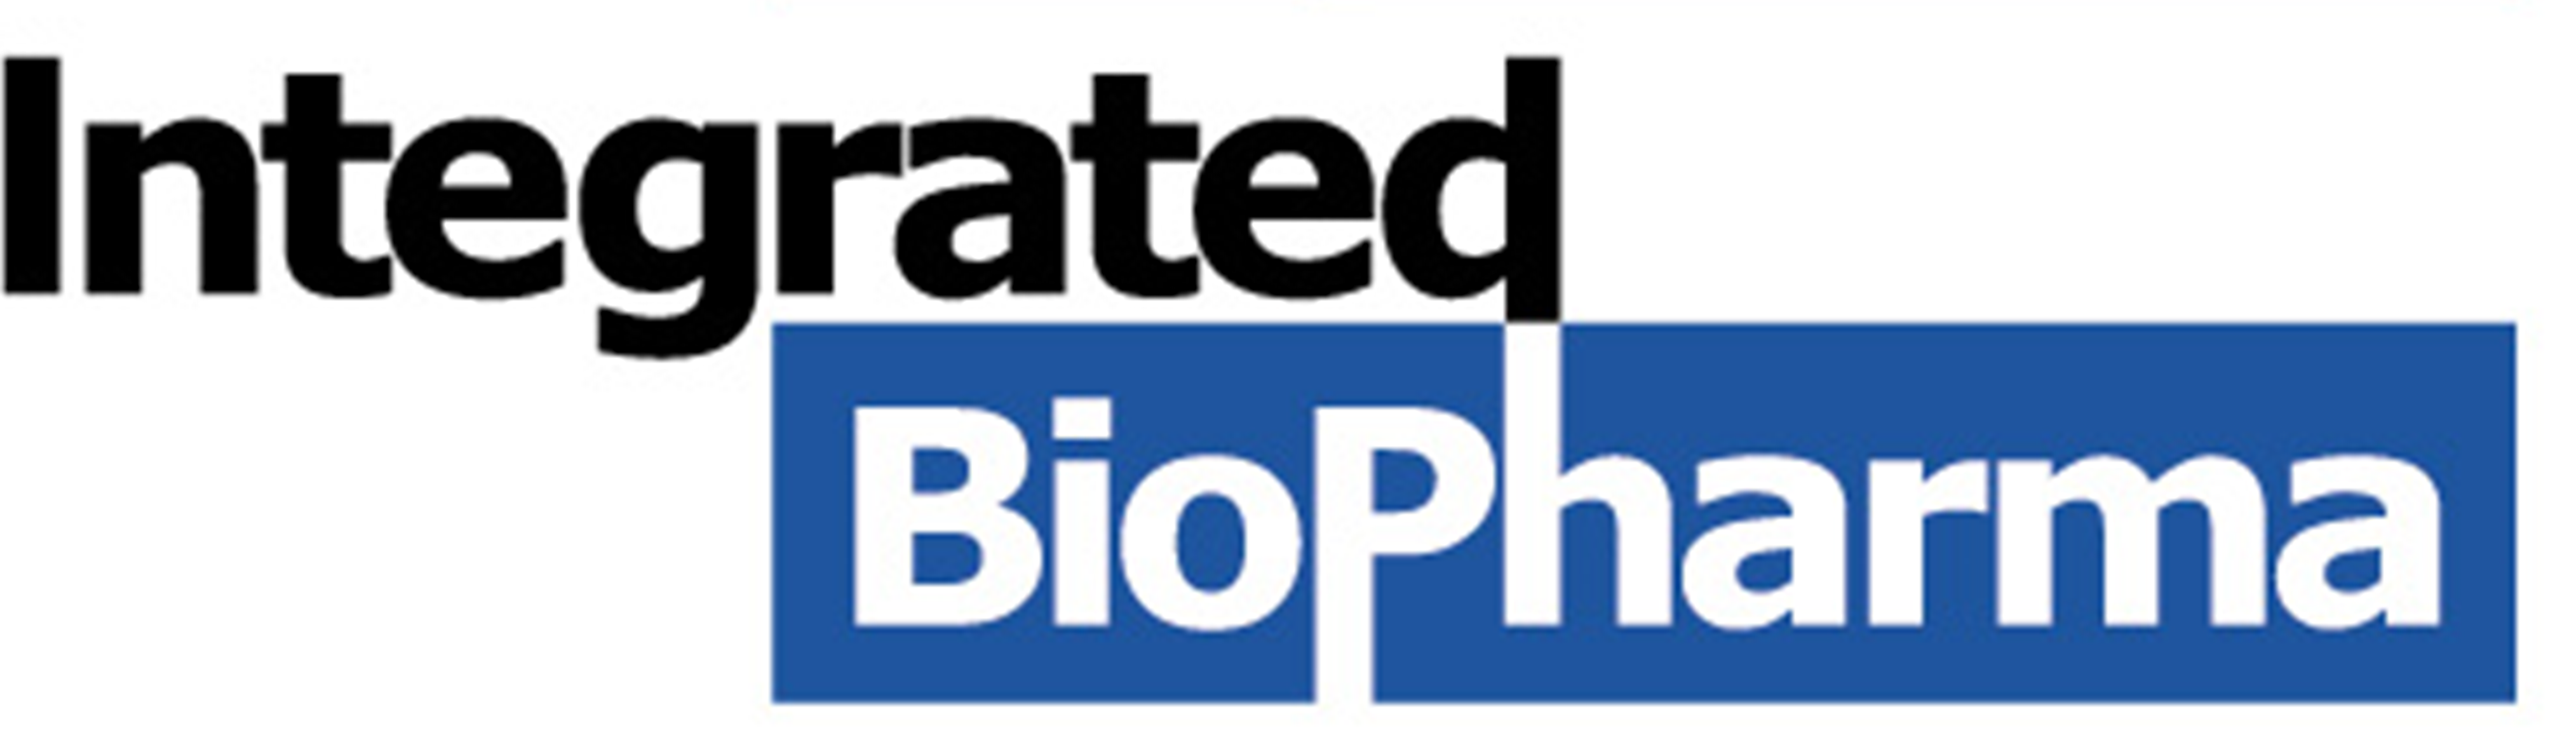 Integrated BioPharma, Inc., Thursday, May 13, 2021, Press release picture